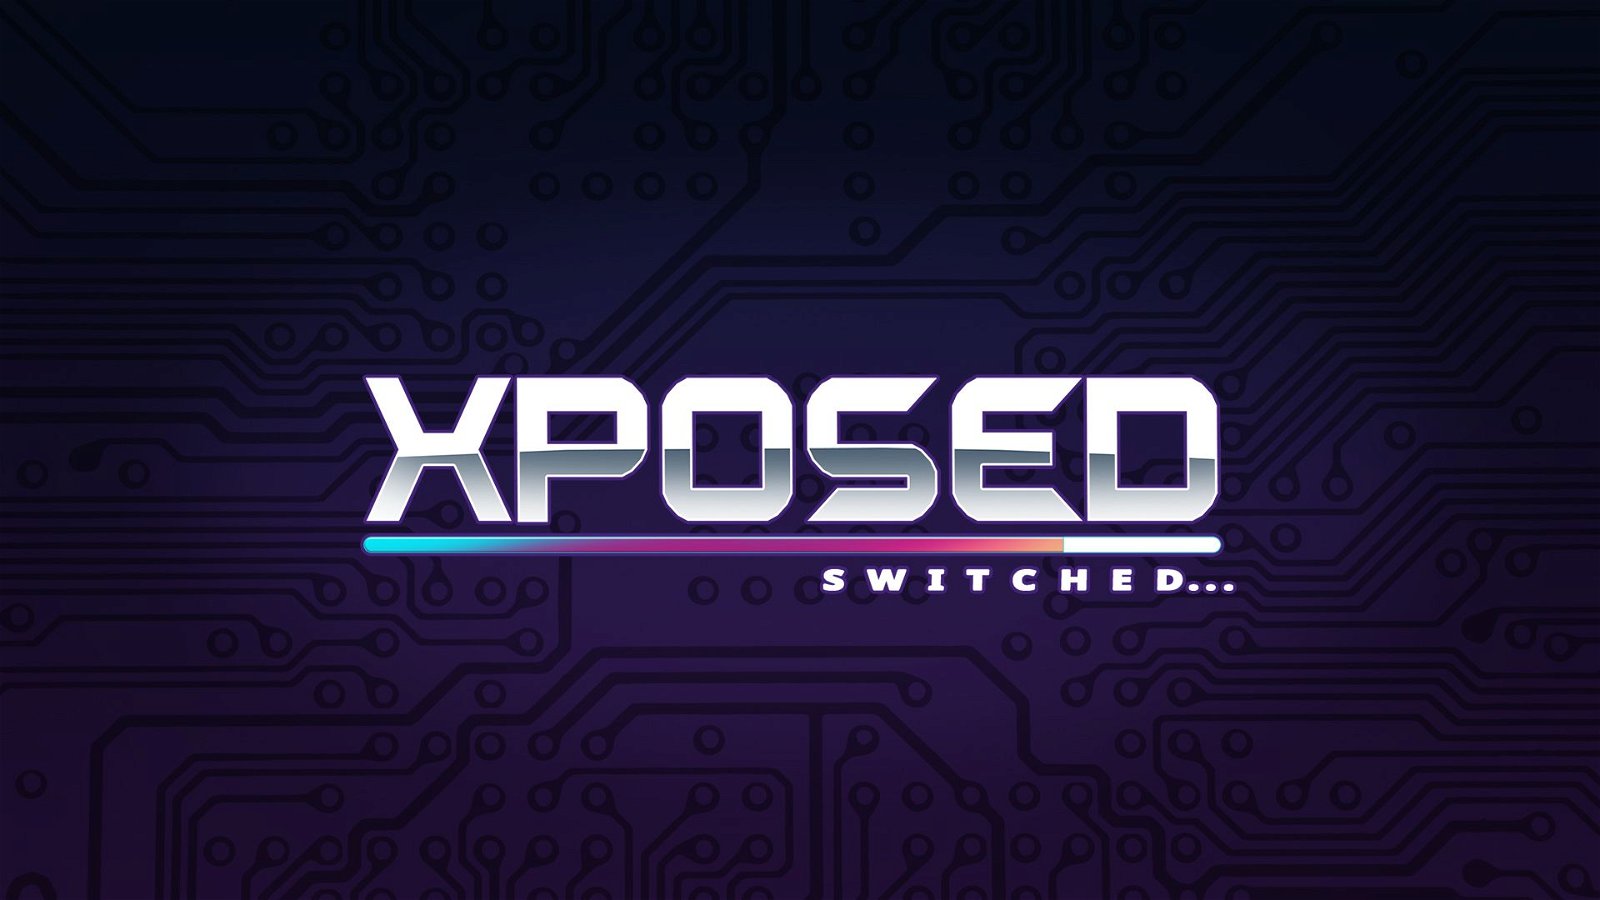 Image of XPOSED SWITCHED